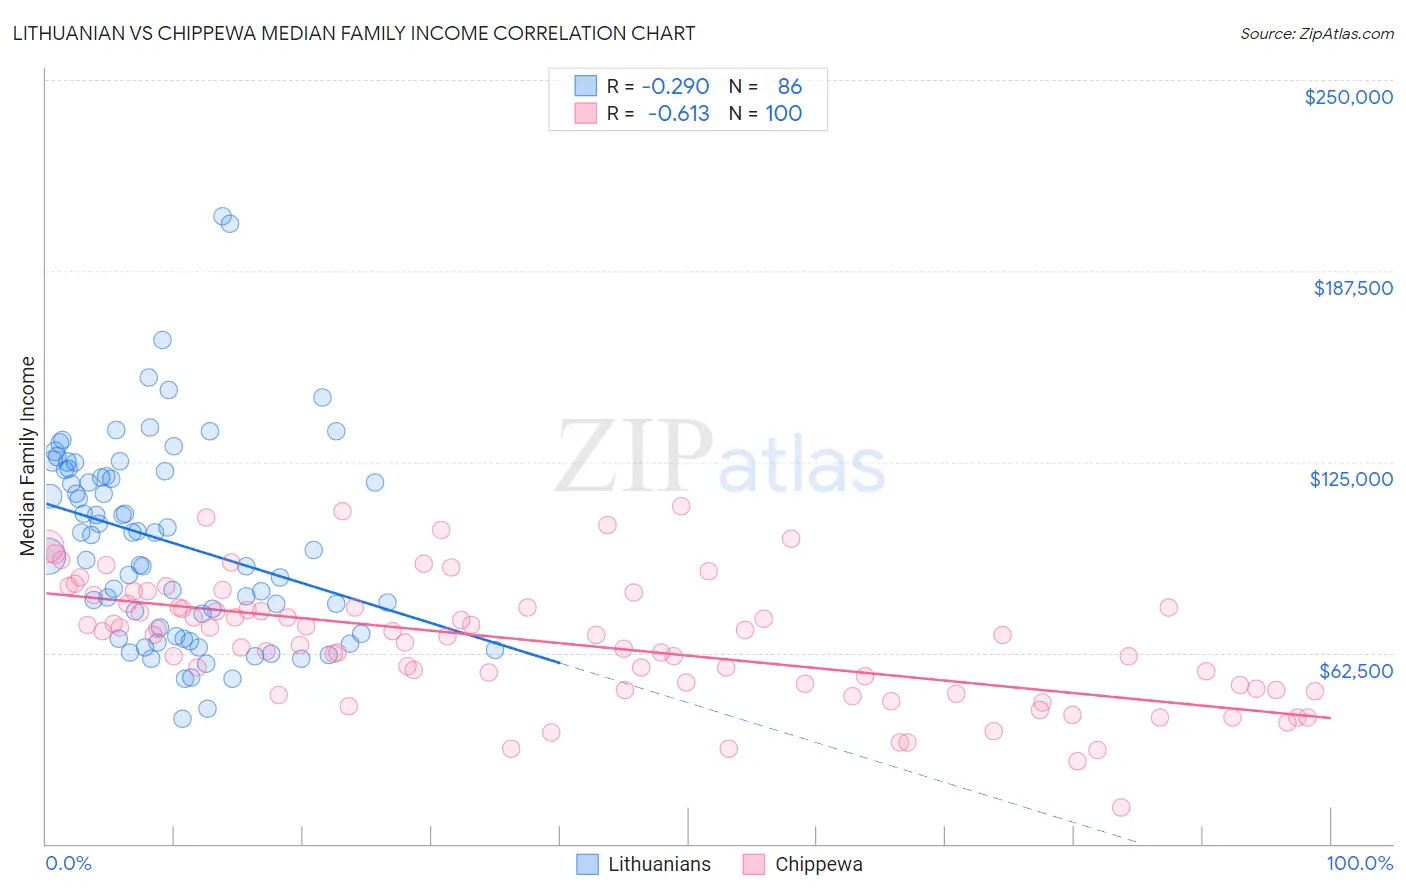 Lithuanian vs Chippewa Median Family Income